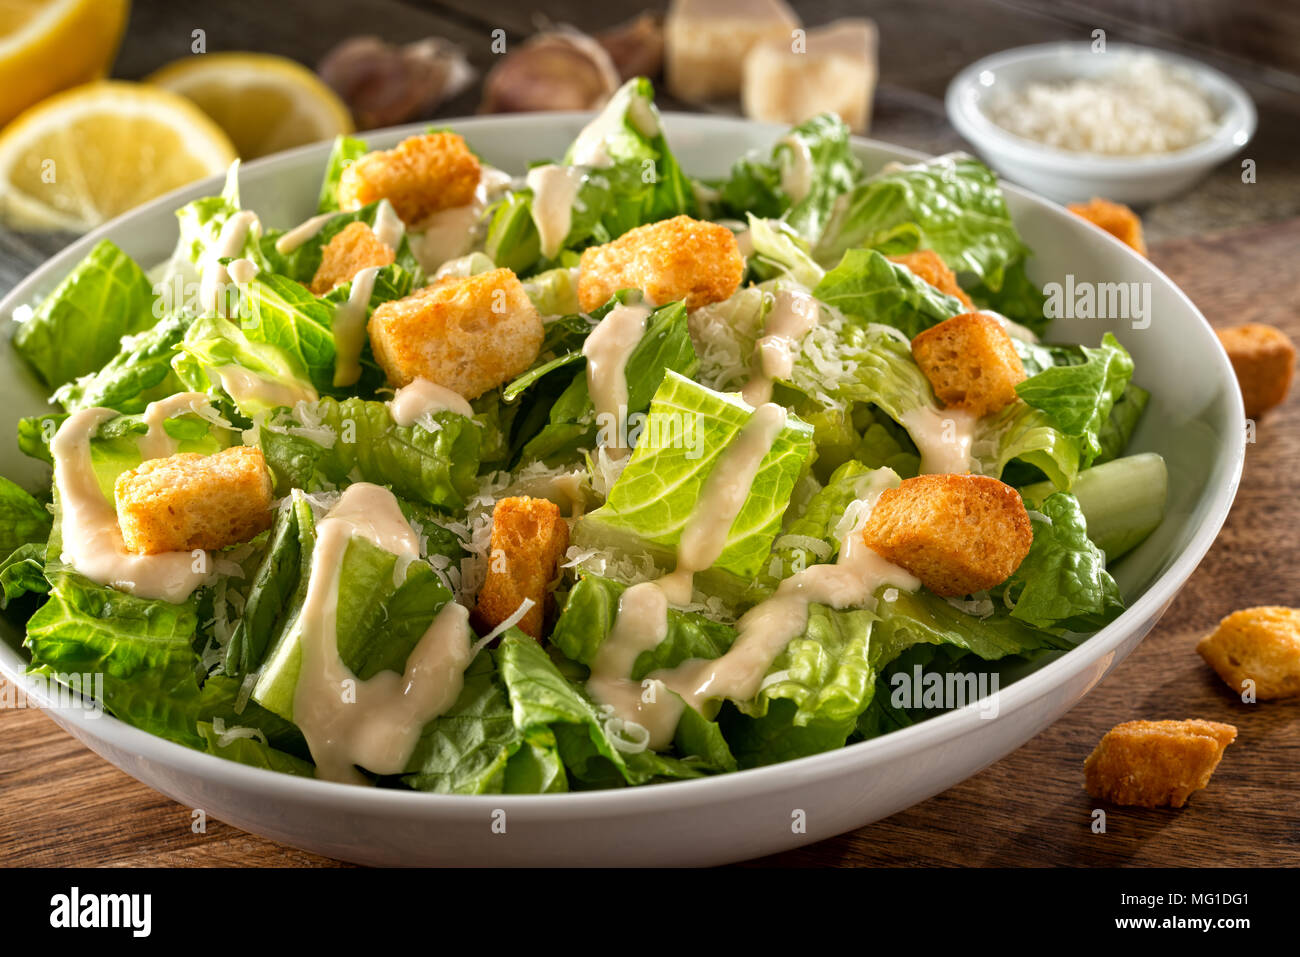 Delicious caesar salad with parmesan cheese, homemade croutons and dressing. Stock Photo